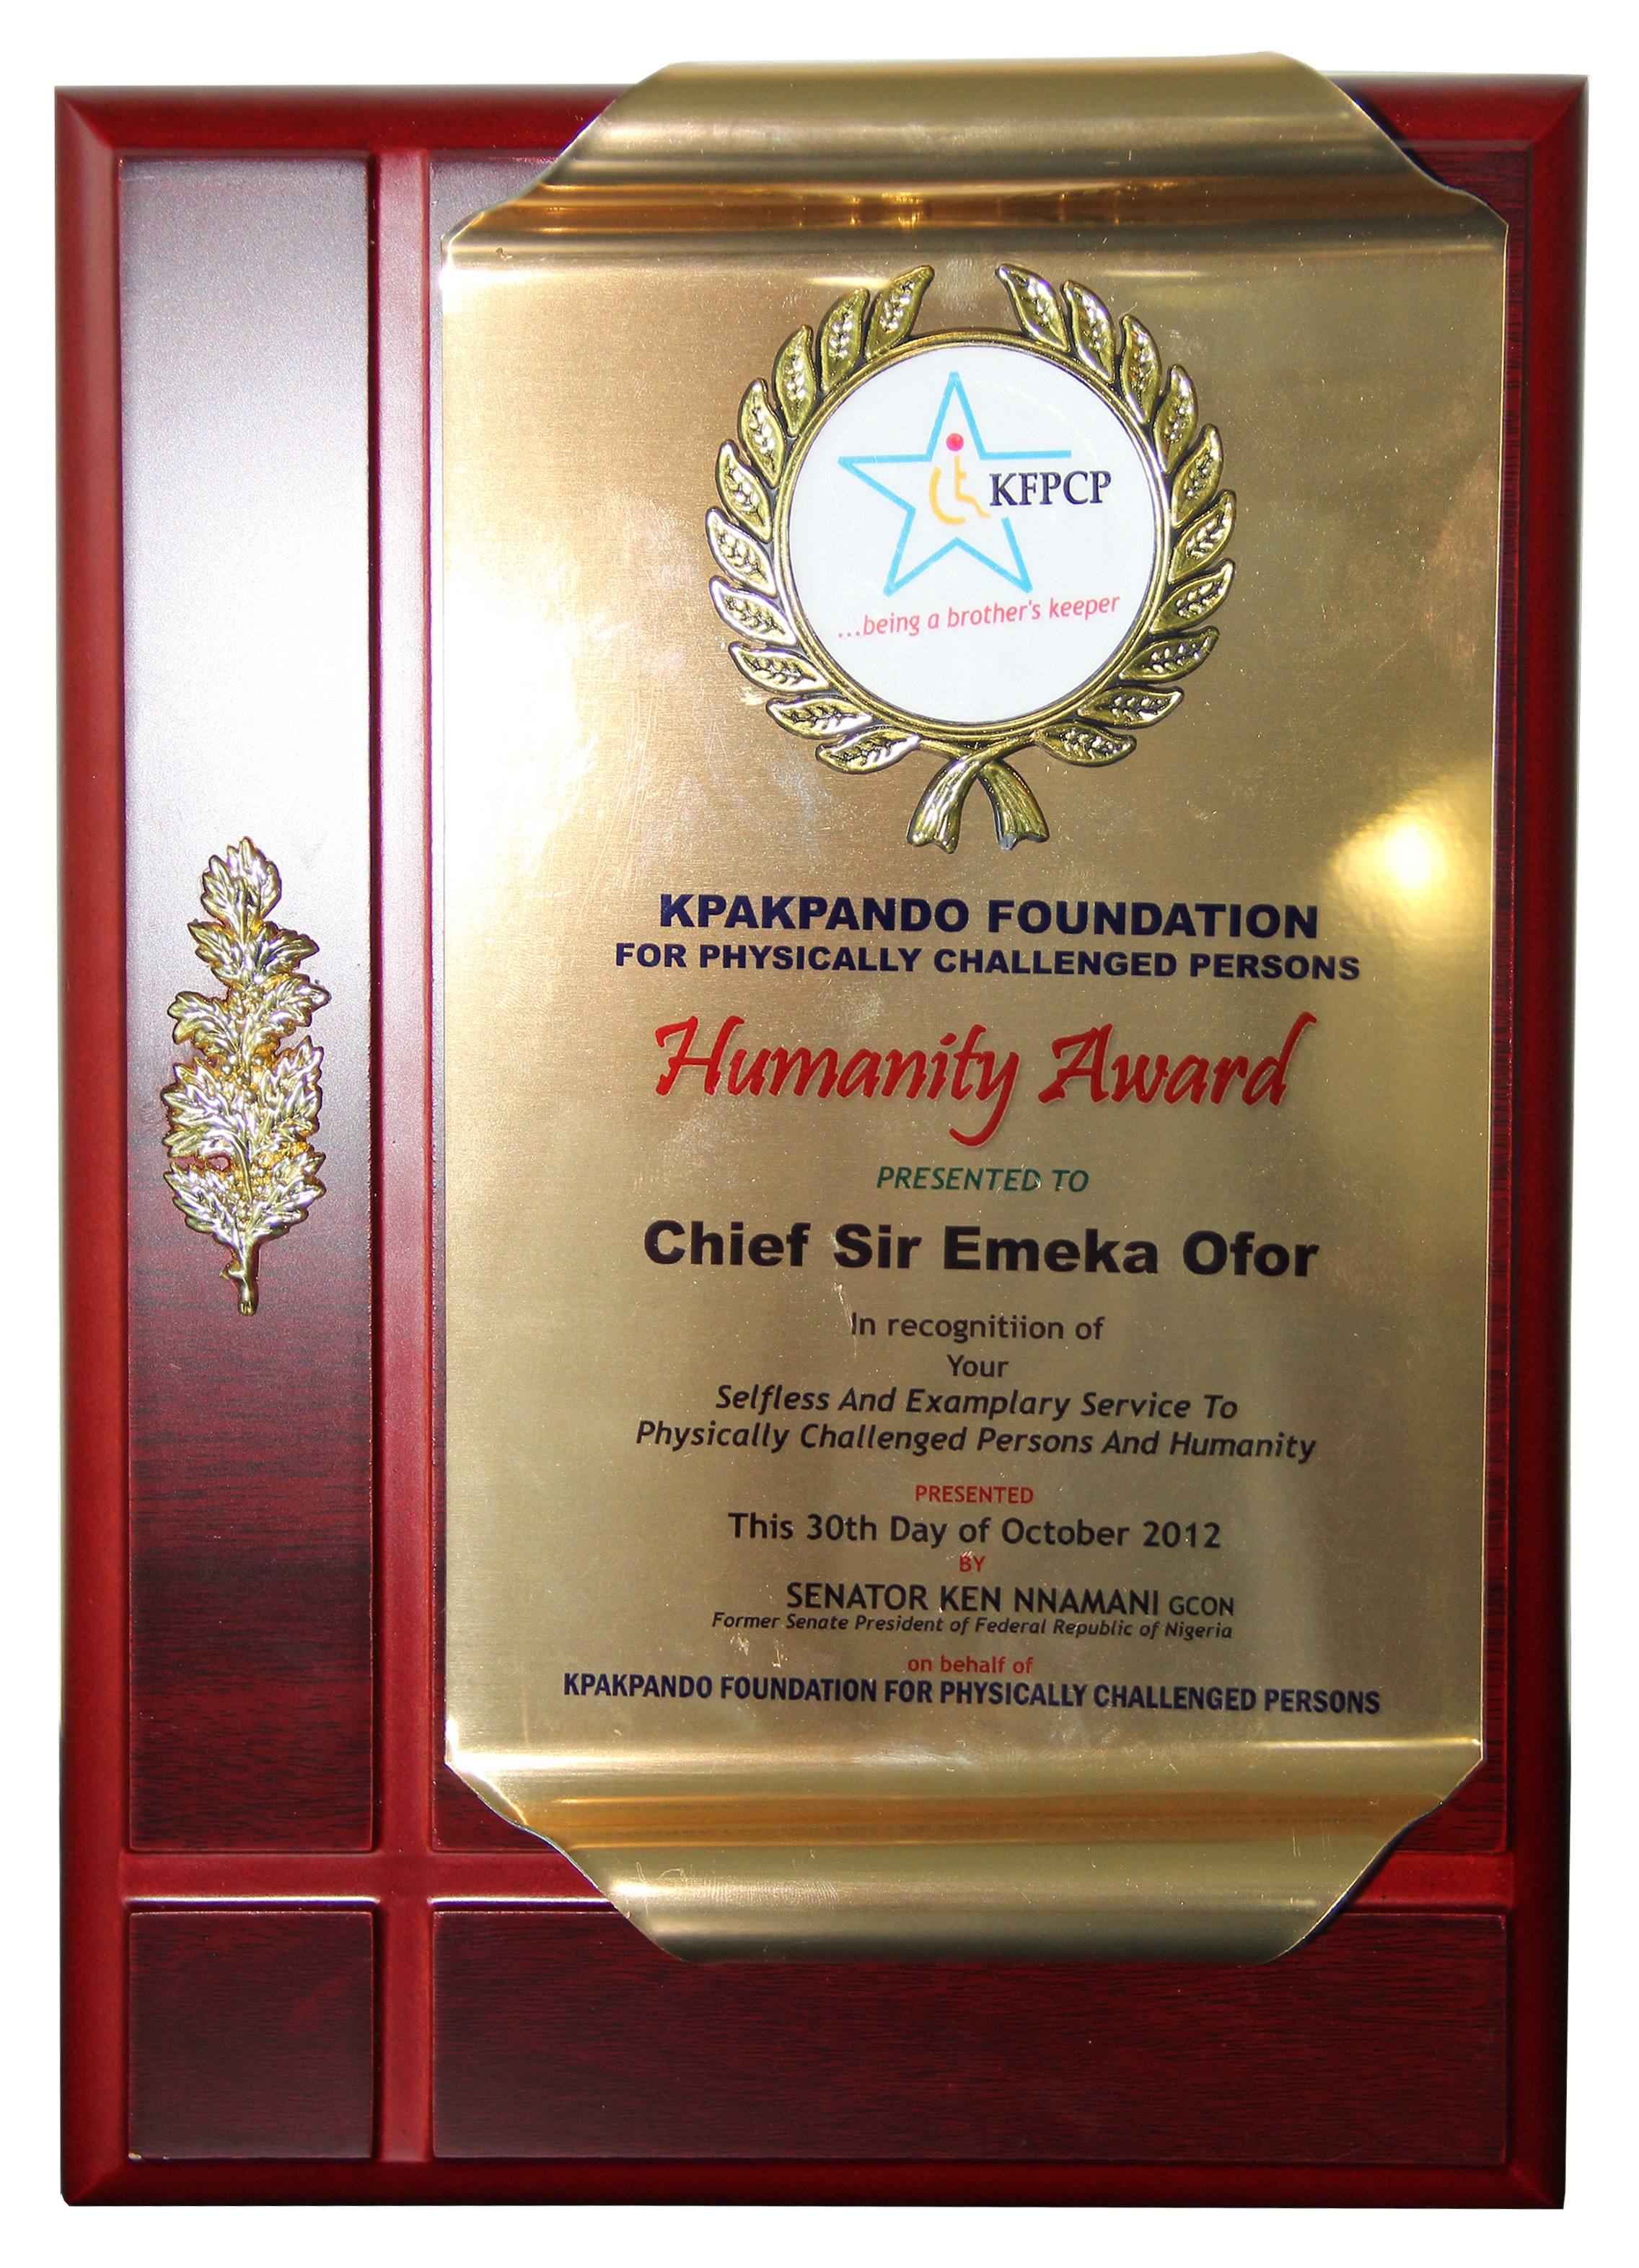 The Kpakpando Foundation for Physically Challenged Persons Honors Sir Emeka Offor